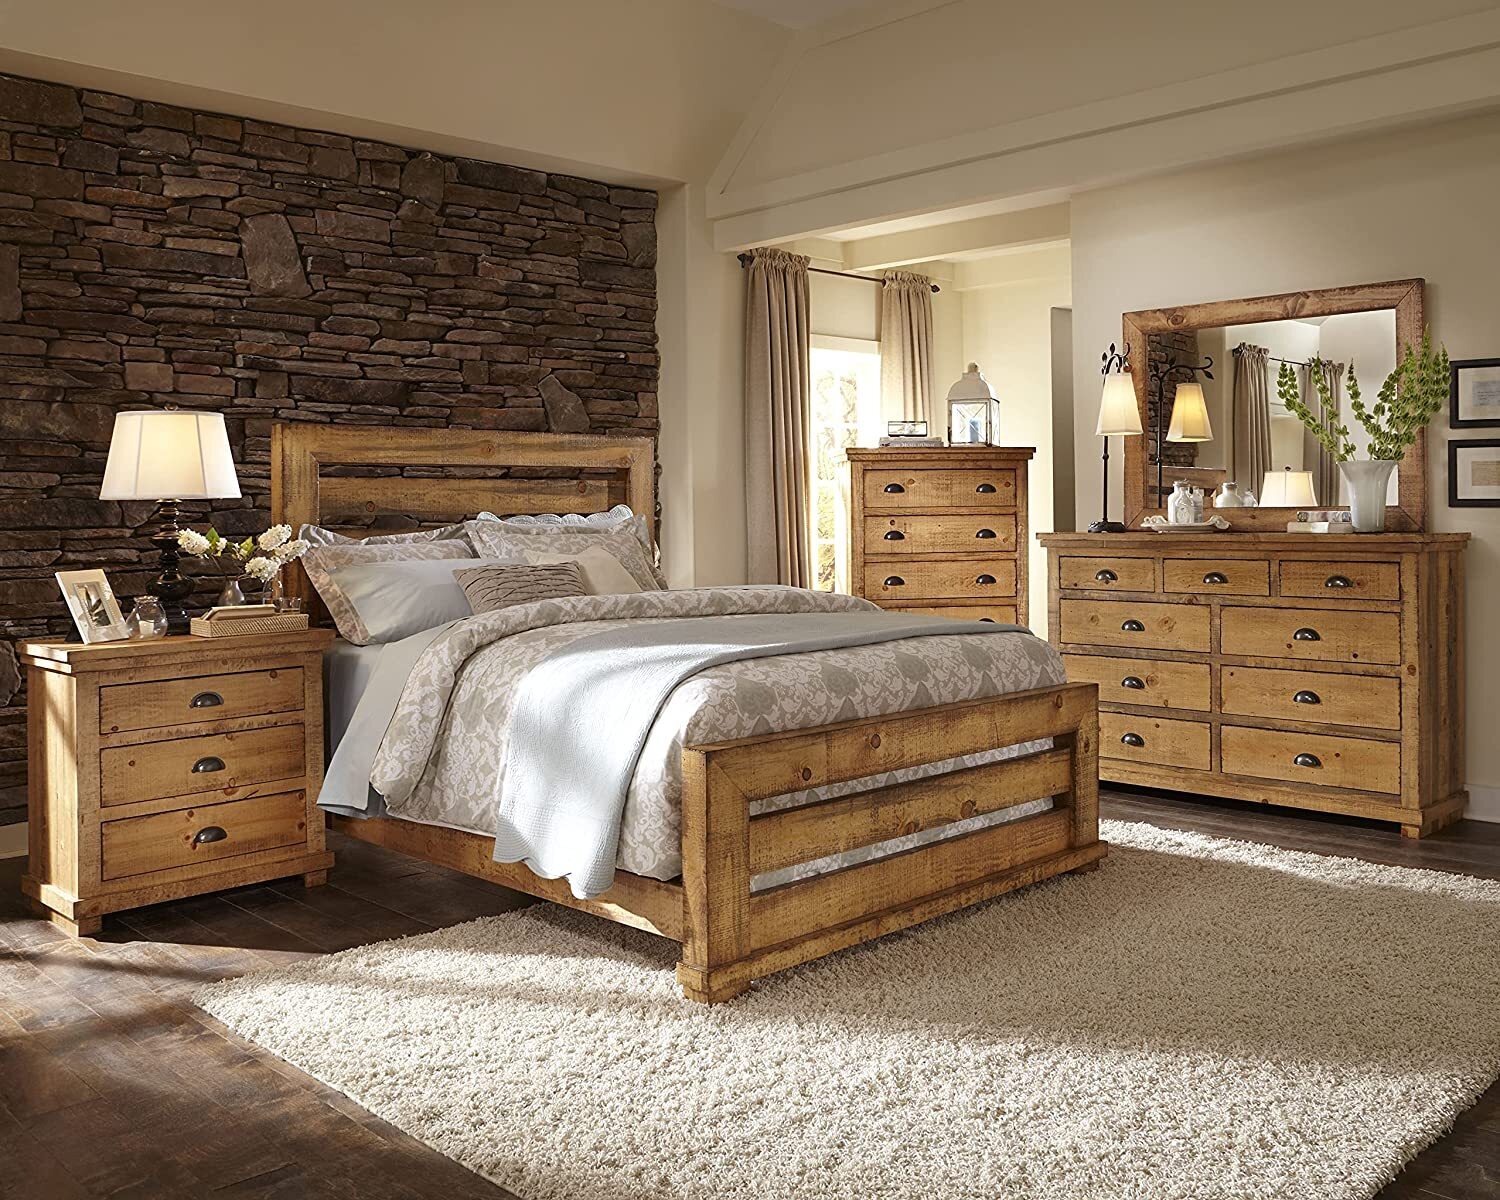 Knotty Pine King Bed Frame